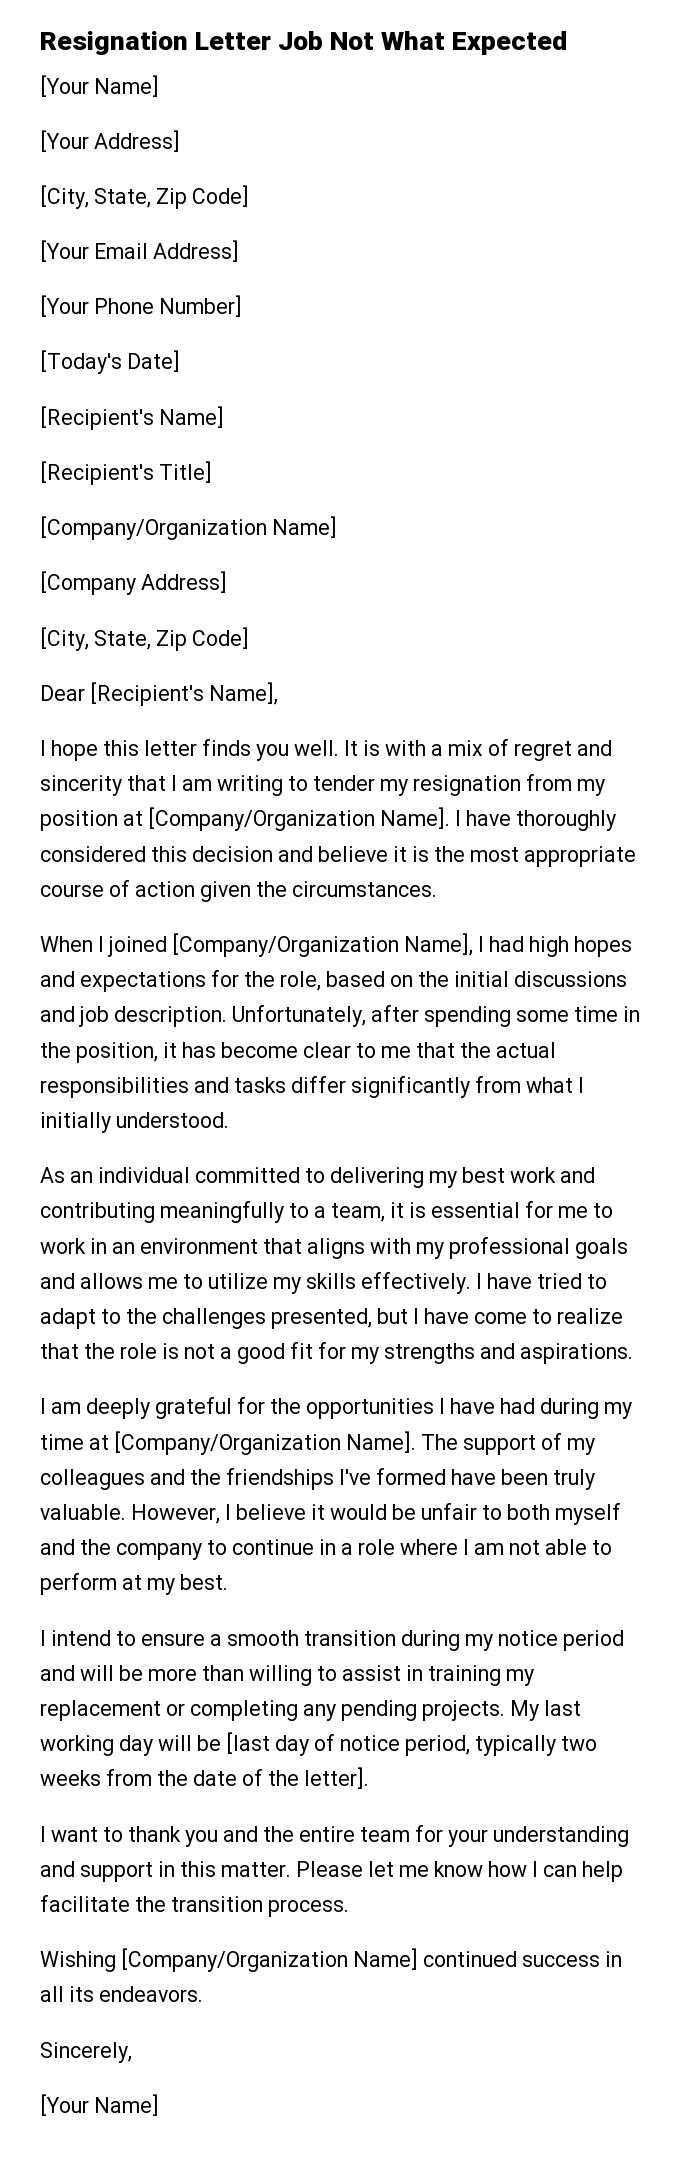 Resignation Letter Job Not What Expected